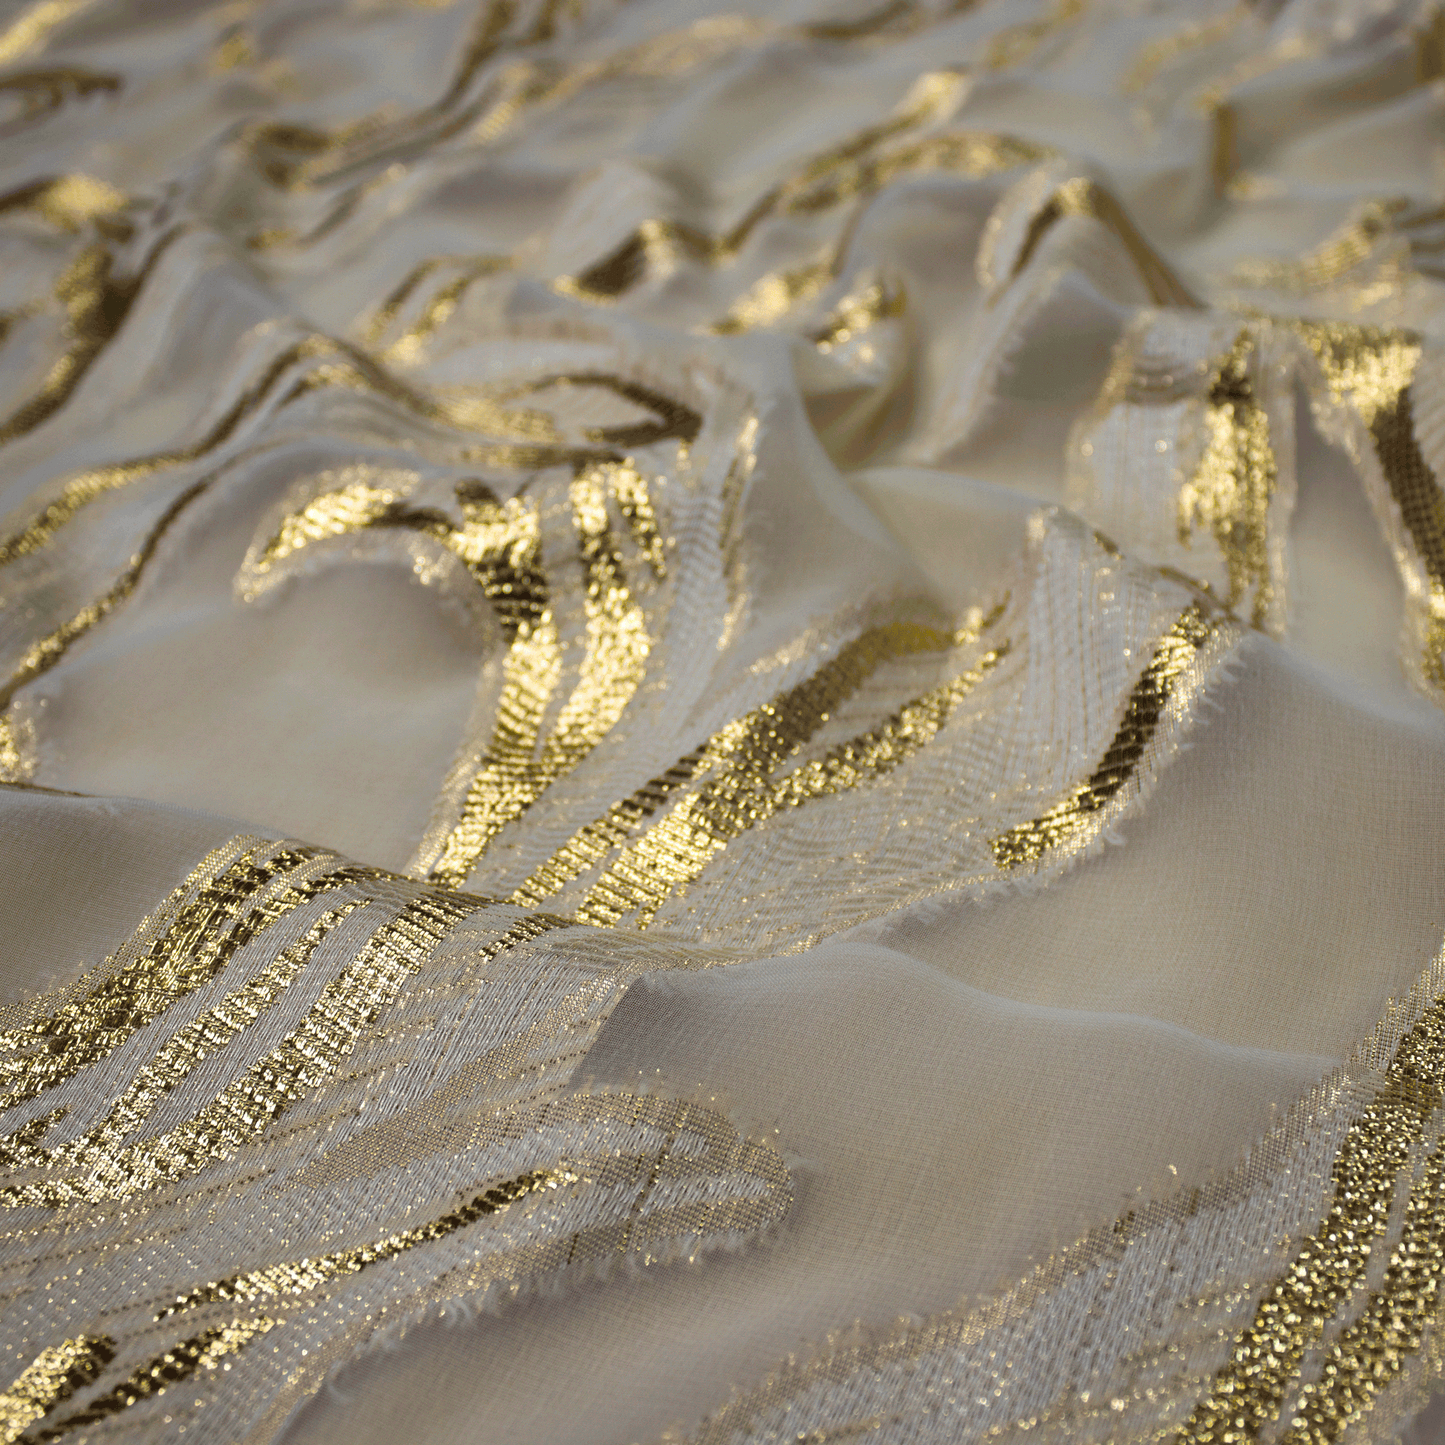 beautiful Ivory gold Dirac fransawi, made from fine fabric with intricate floral design patterns. This dirac is definitely going to turn heads.